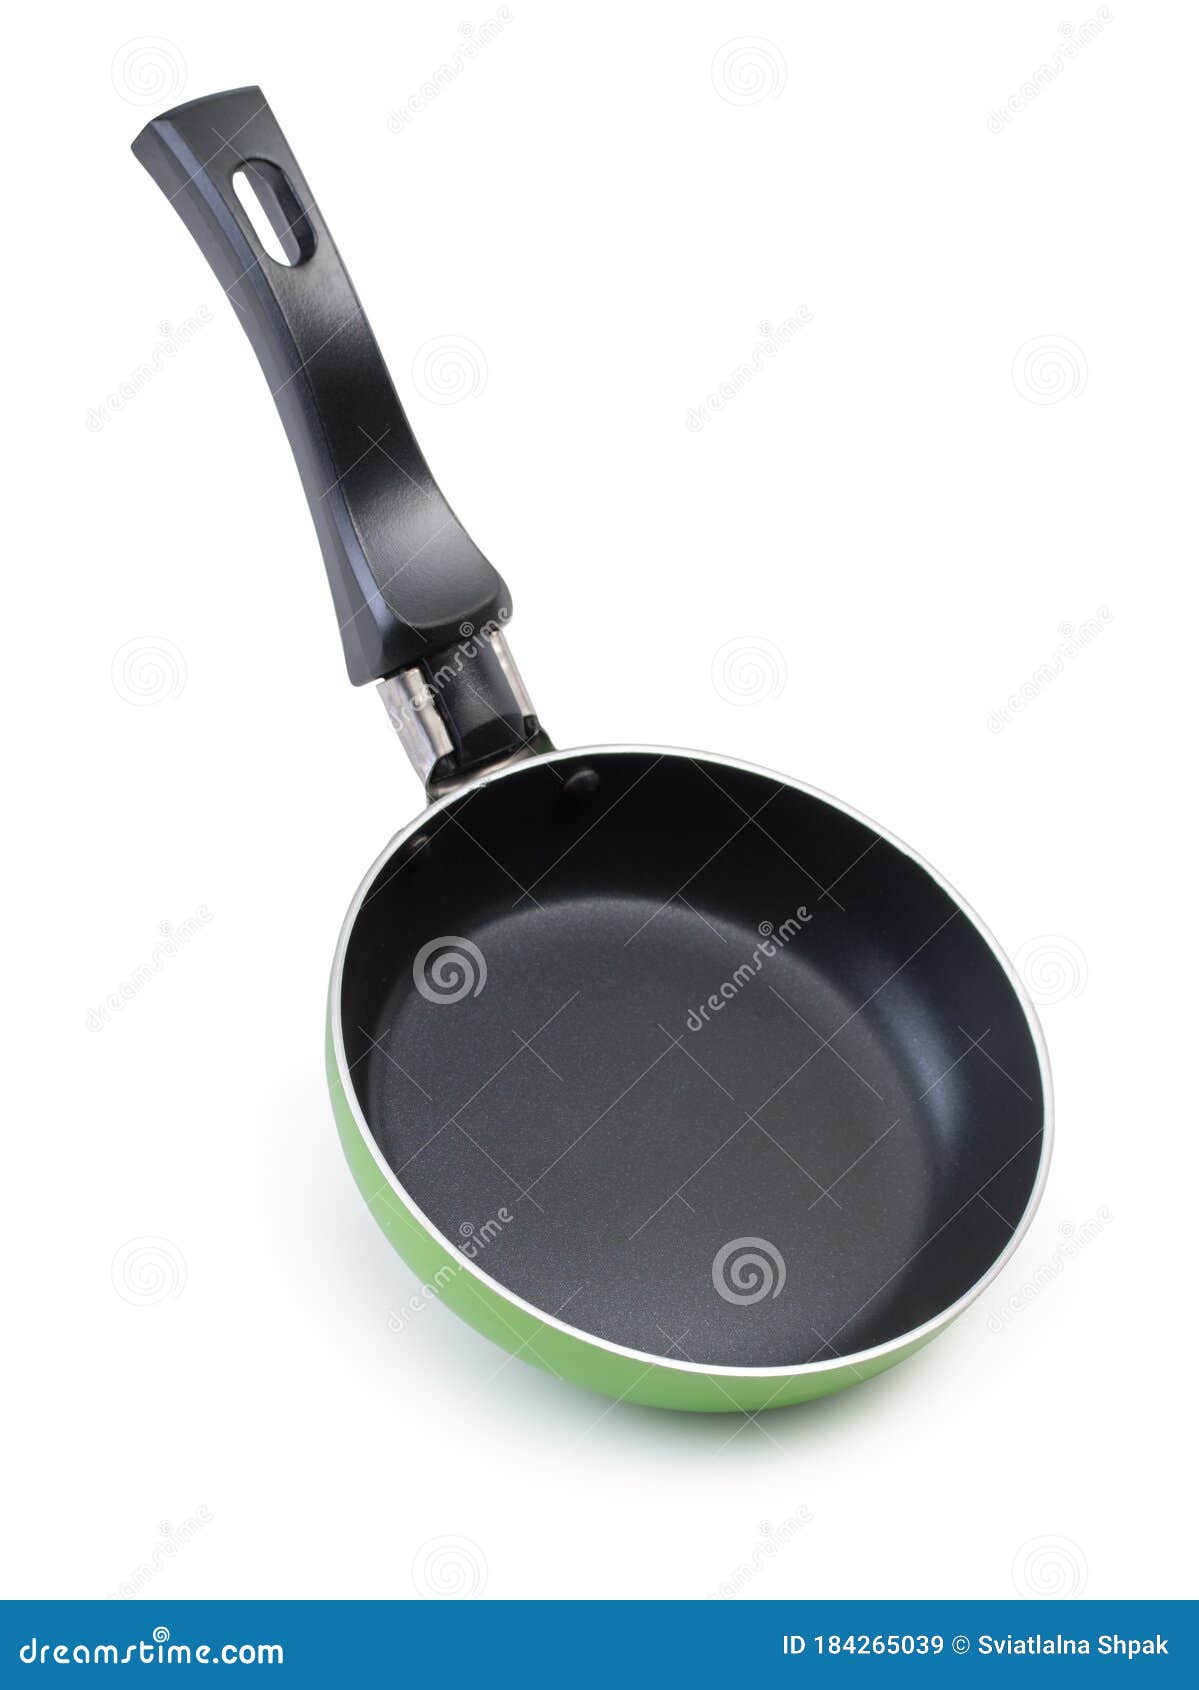 https://thumbs.dreamstime.com/z/very-small-frying-pan-non-stick-surface-isolated-white-background-very-small-frying-pan-non-stick-surface-isolated-184265039.jpg